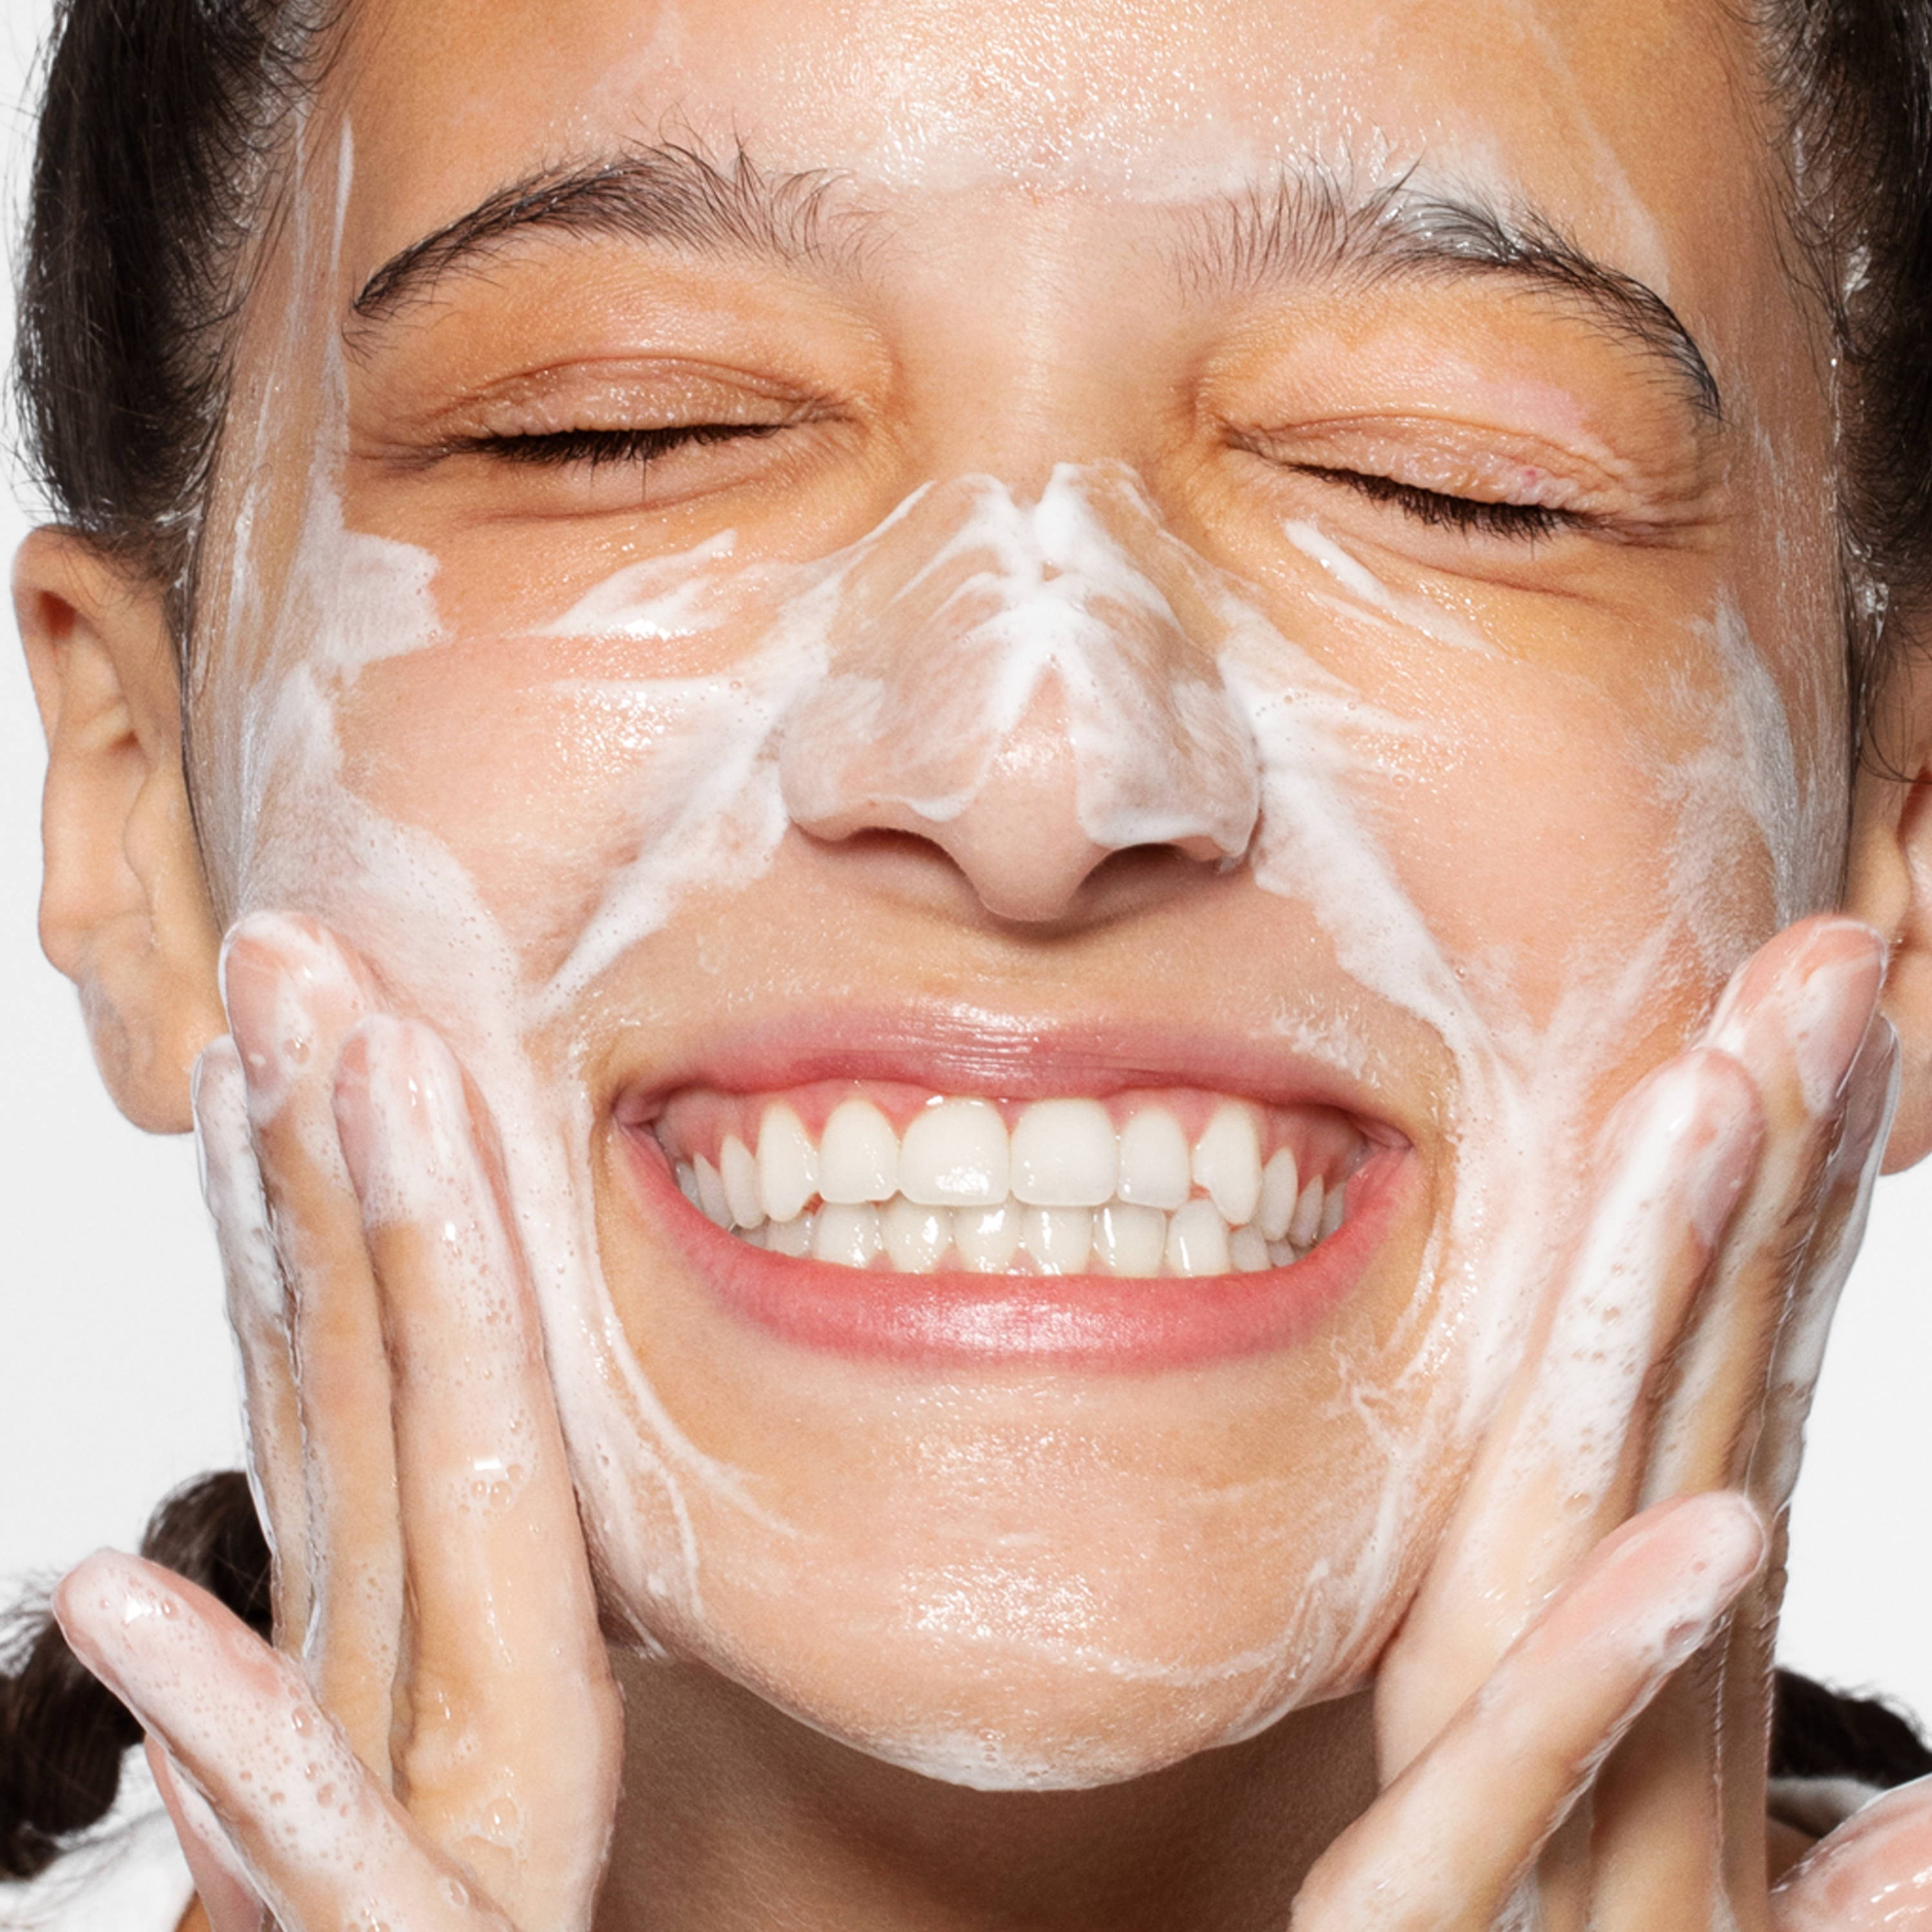 Woman cleansing face and smiling